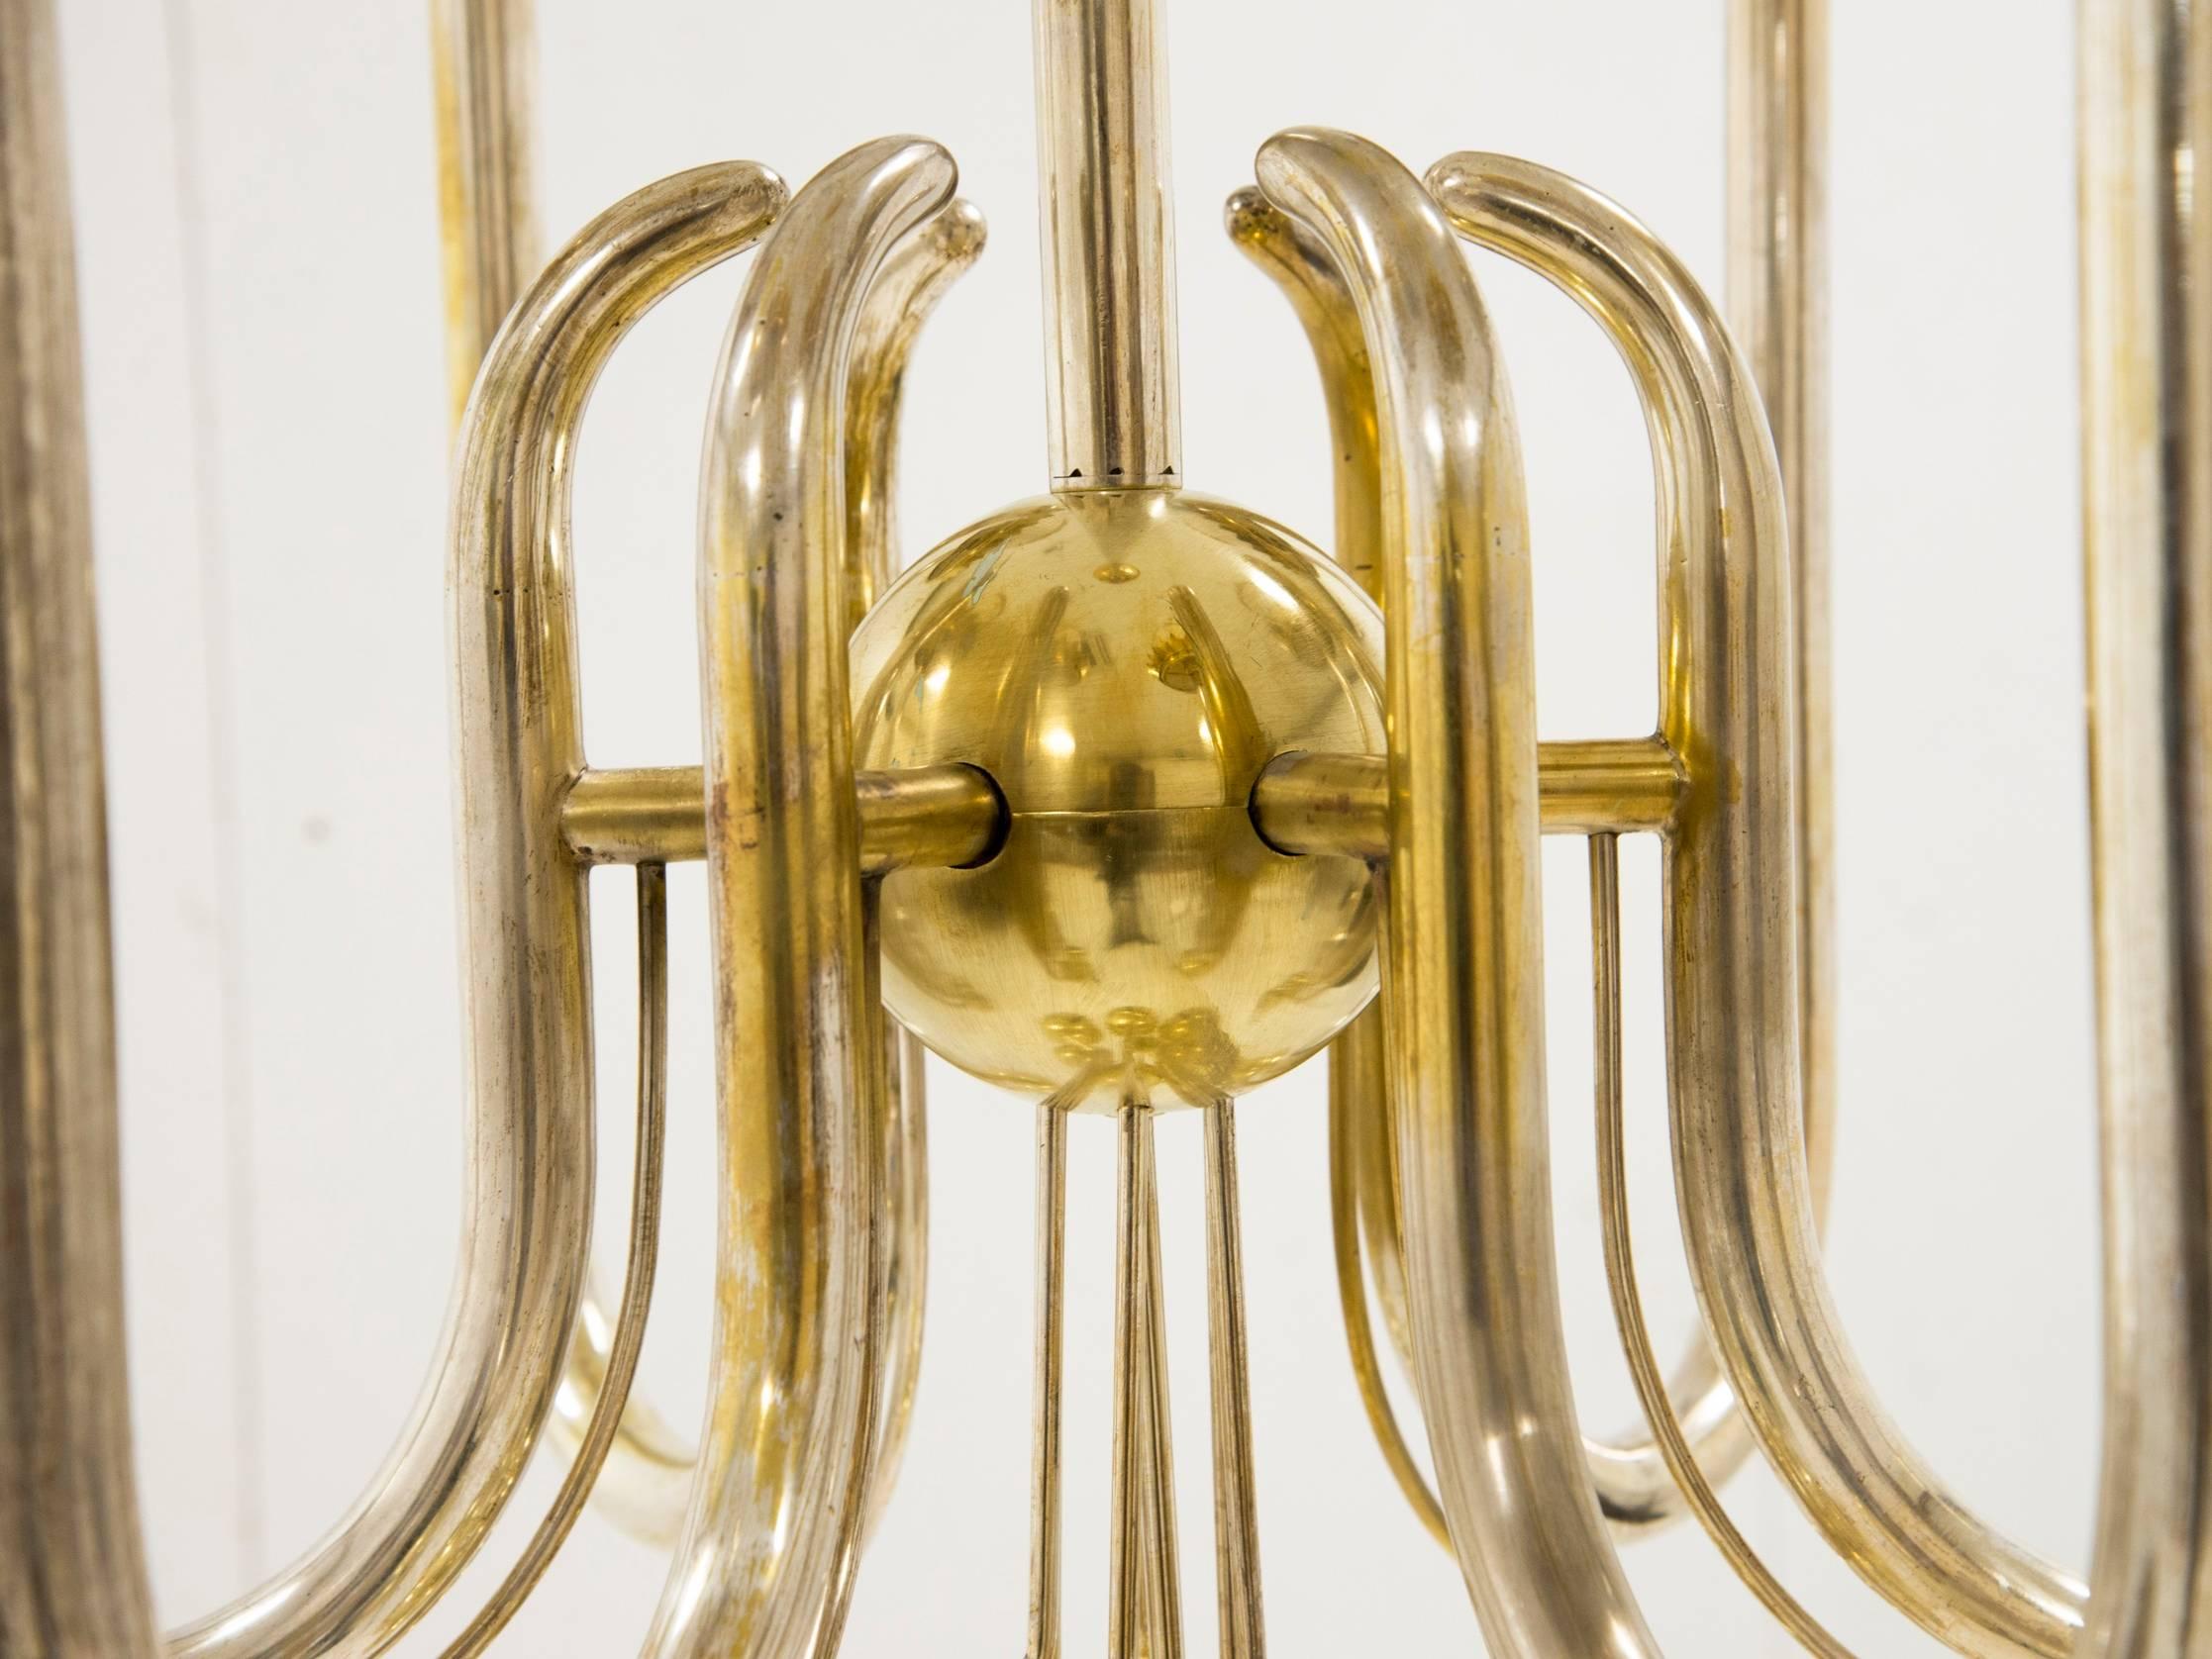 Mid-20th Century Pietro Chiesa, Italian Ceiling Light in Brass, Rare Model from 1940s For Sale